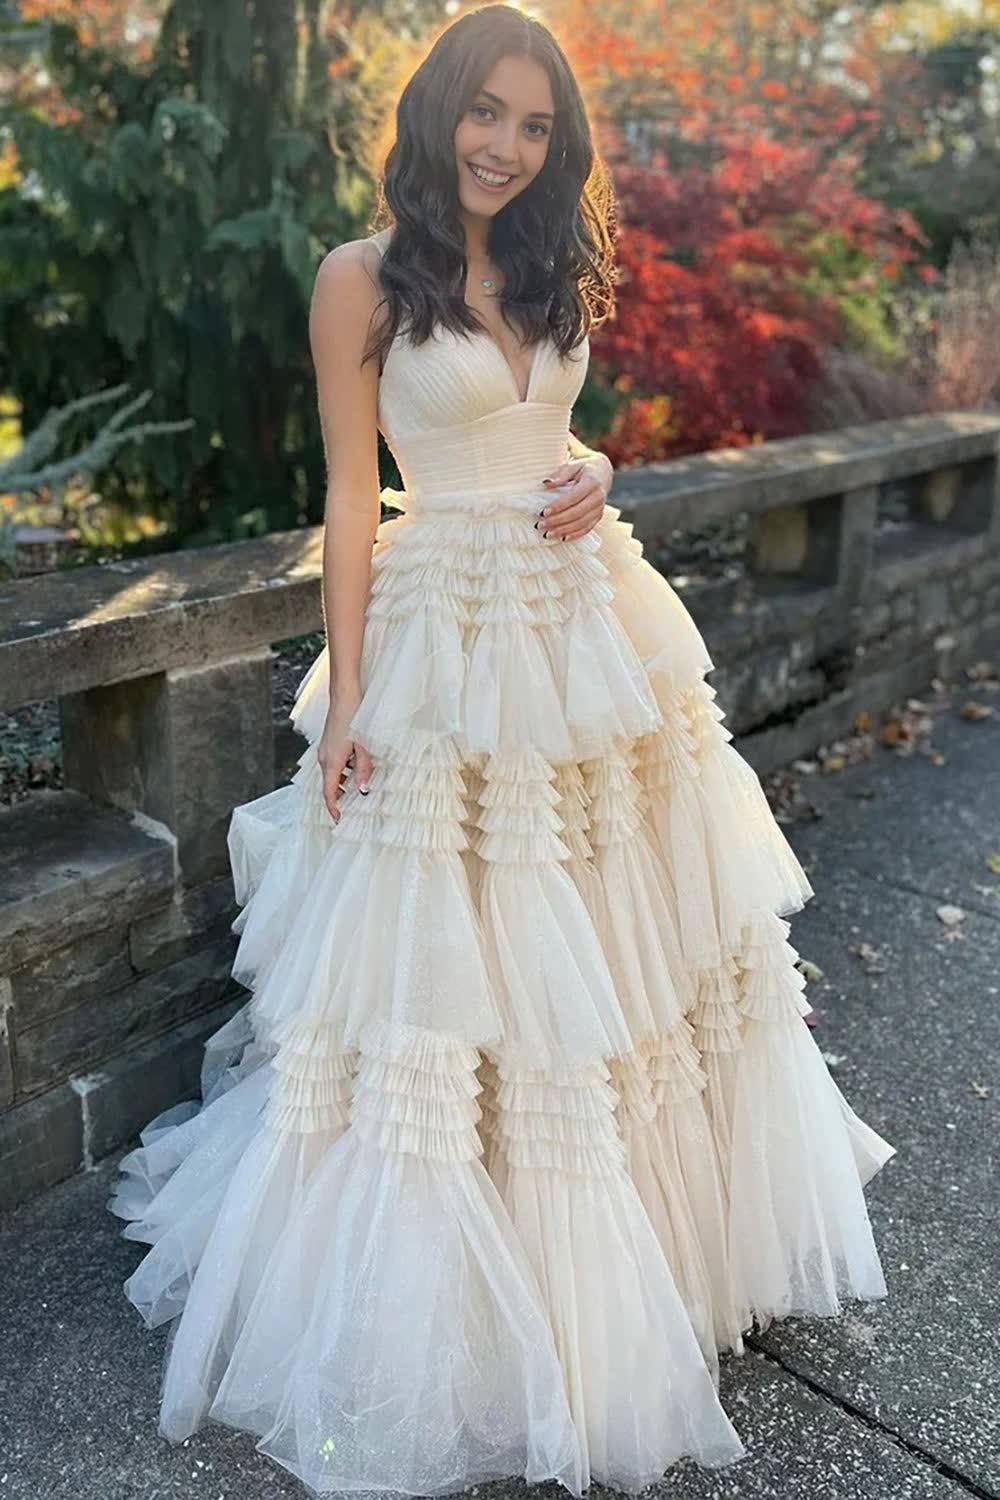 Beige Tulle Tiered Spaghetti Straps Long Corset Prom Dress with Slit Gowns, Beige Tulle Tiered Spaghetti Straps Long Prom Dress with Slit